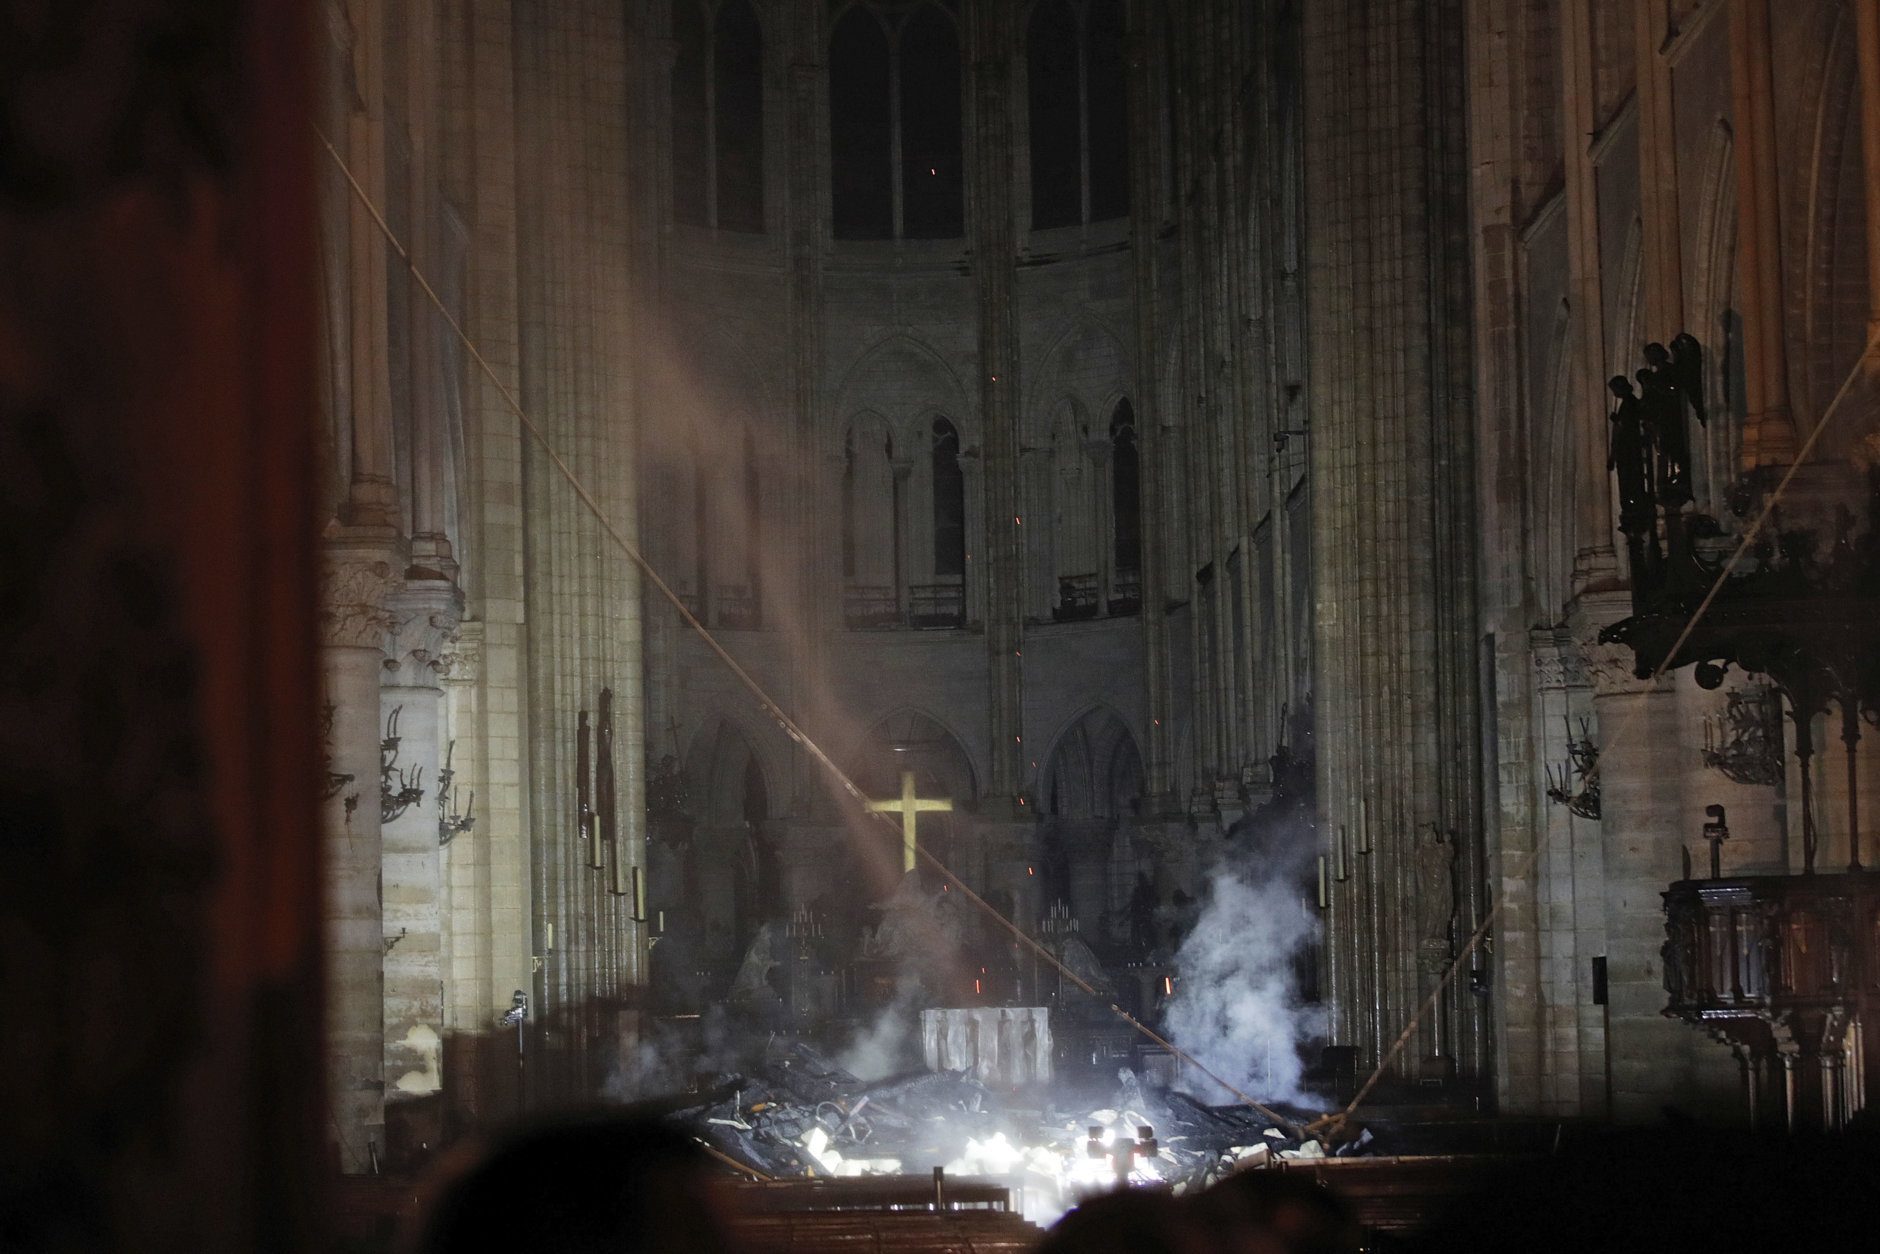 Smoke is seen in the interior of Notre Dame cathedral in Paris, Monday, April 15, 2019. A catastrophic fire engulfed the upper reaches of Paris' soaring Notre Dame Cathedral as it was undergoing renovations Monday, threatening one of the greatest architectural treasures of the Western world as tourists and Parisians looked on aghast from the streets below. (Philippe Wojazer/Pool via AP)